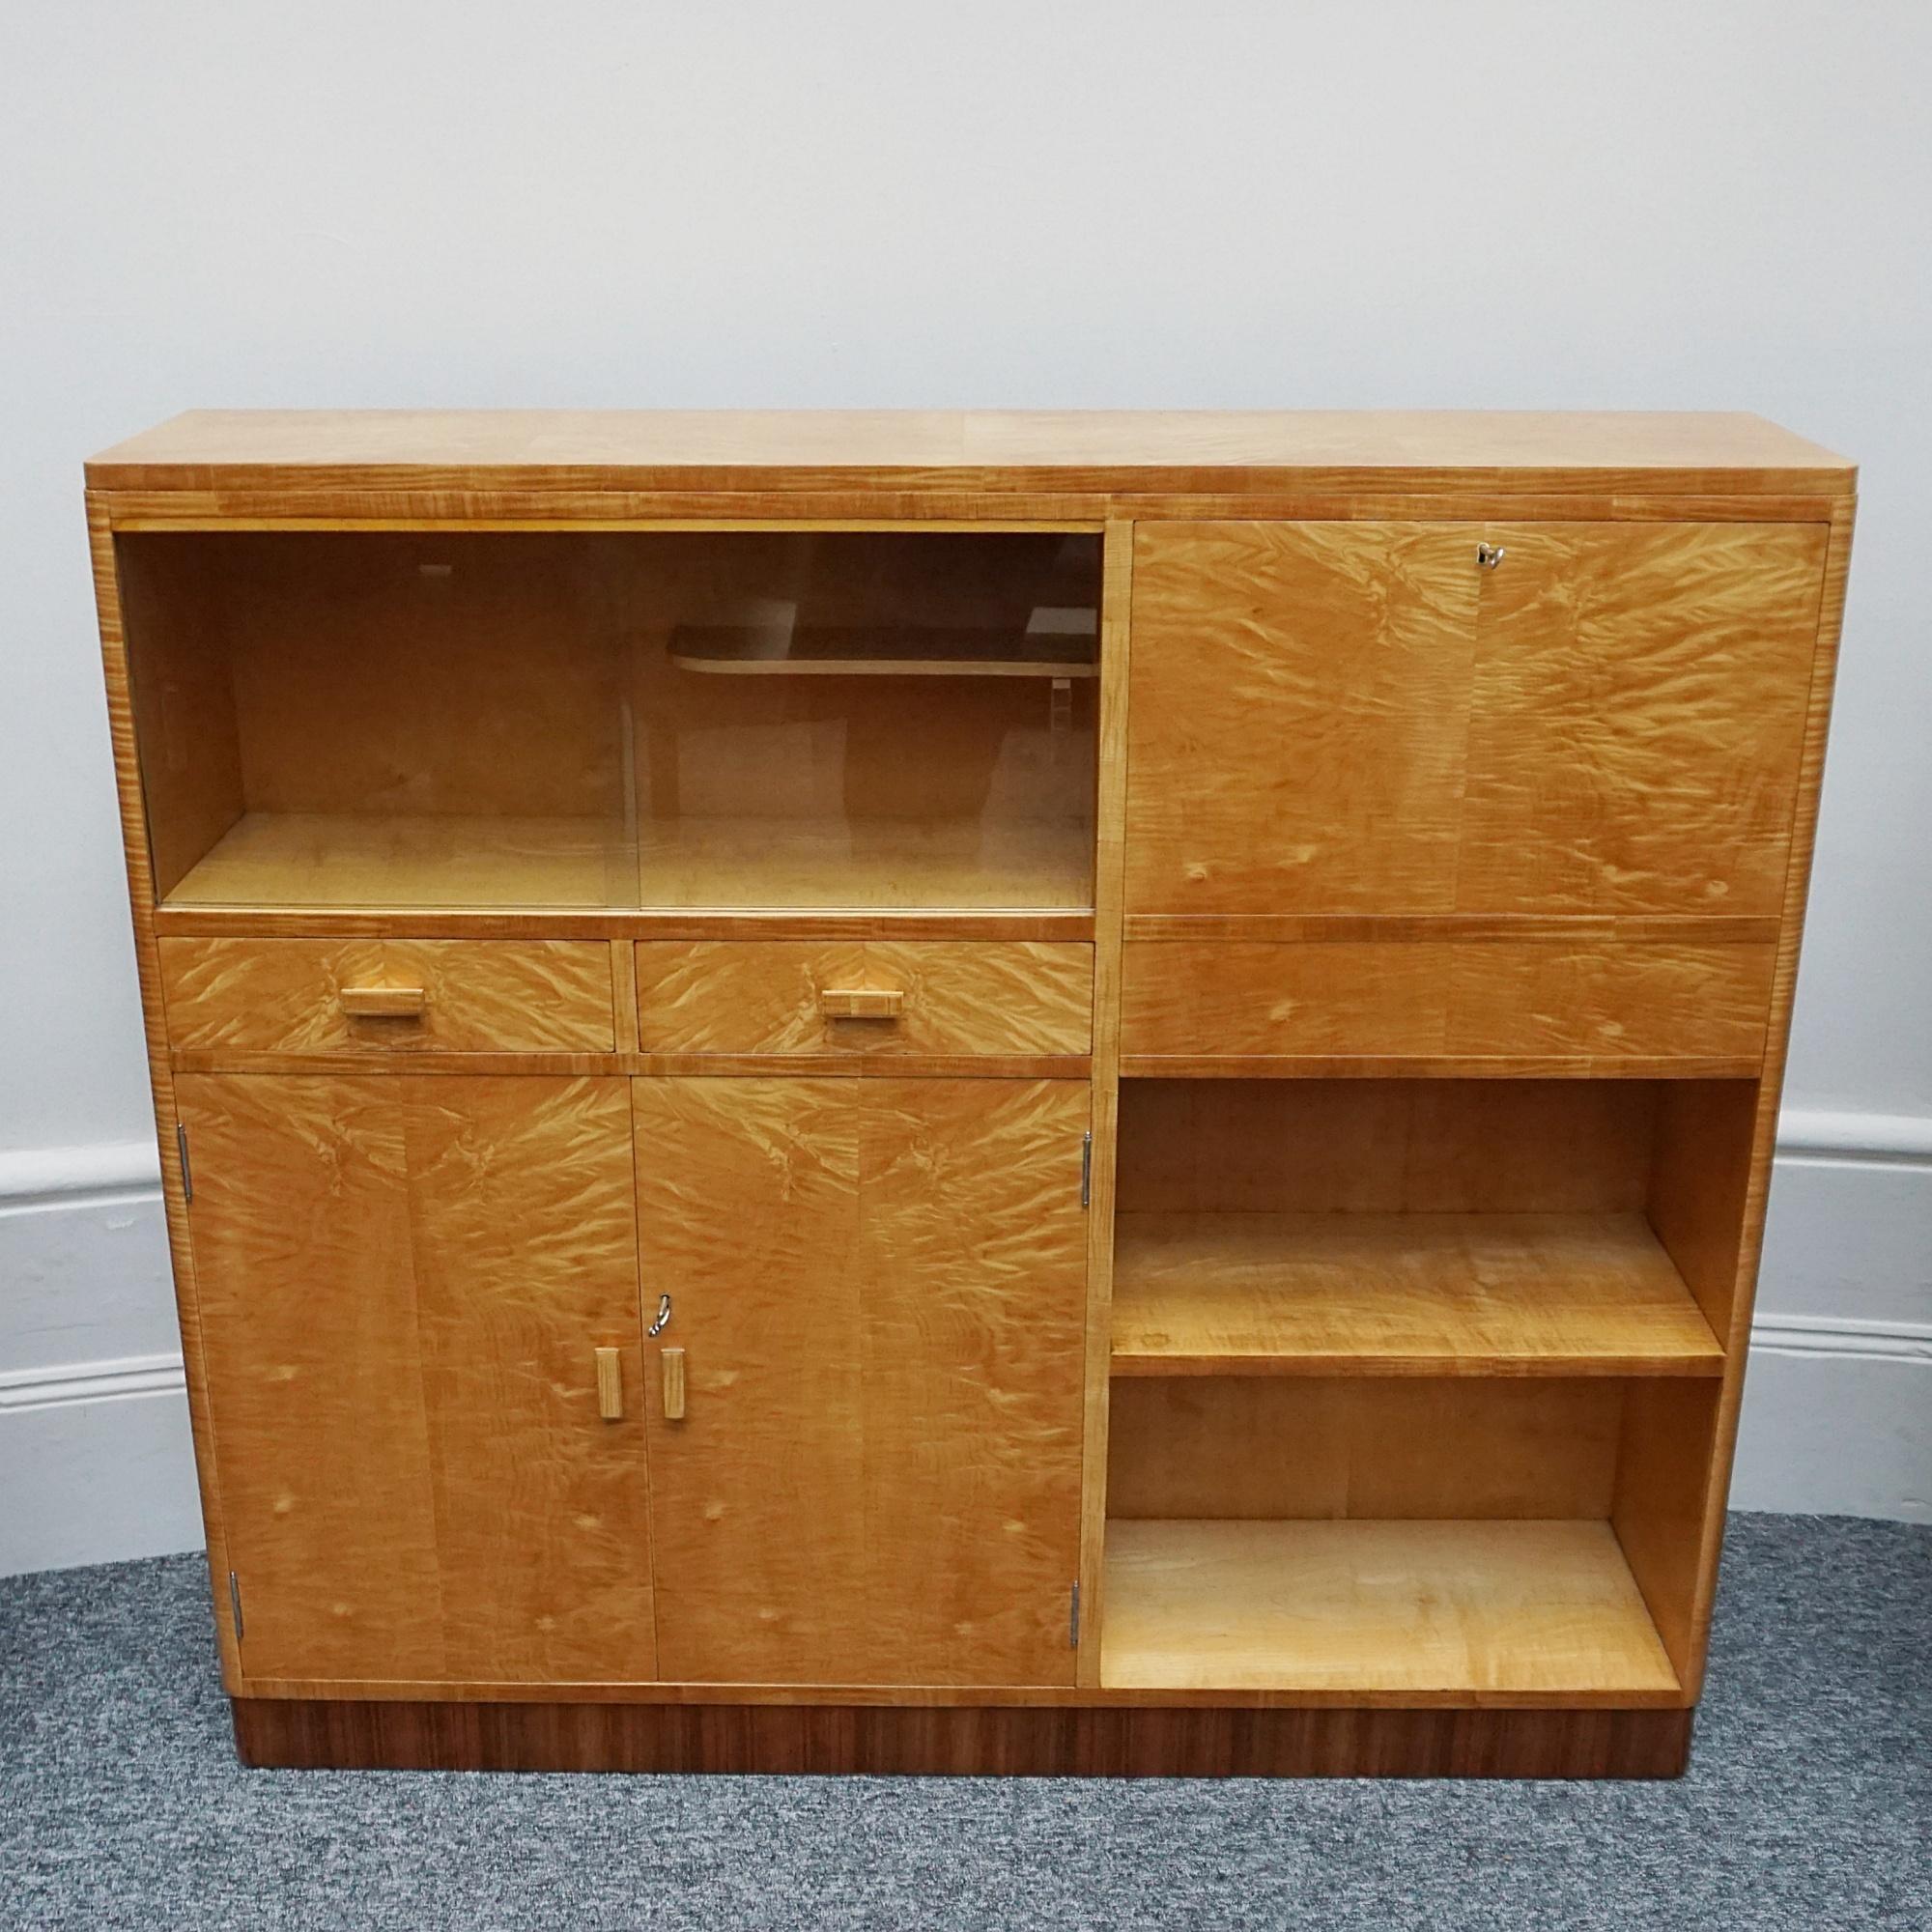 20th Century An Art Deco Satin Birch Honey Coloured Drinks Cabinet by Heal's of London 